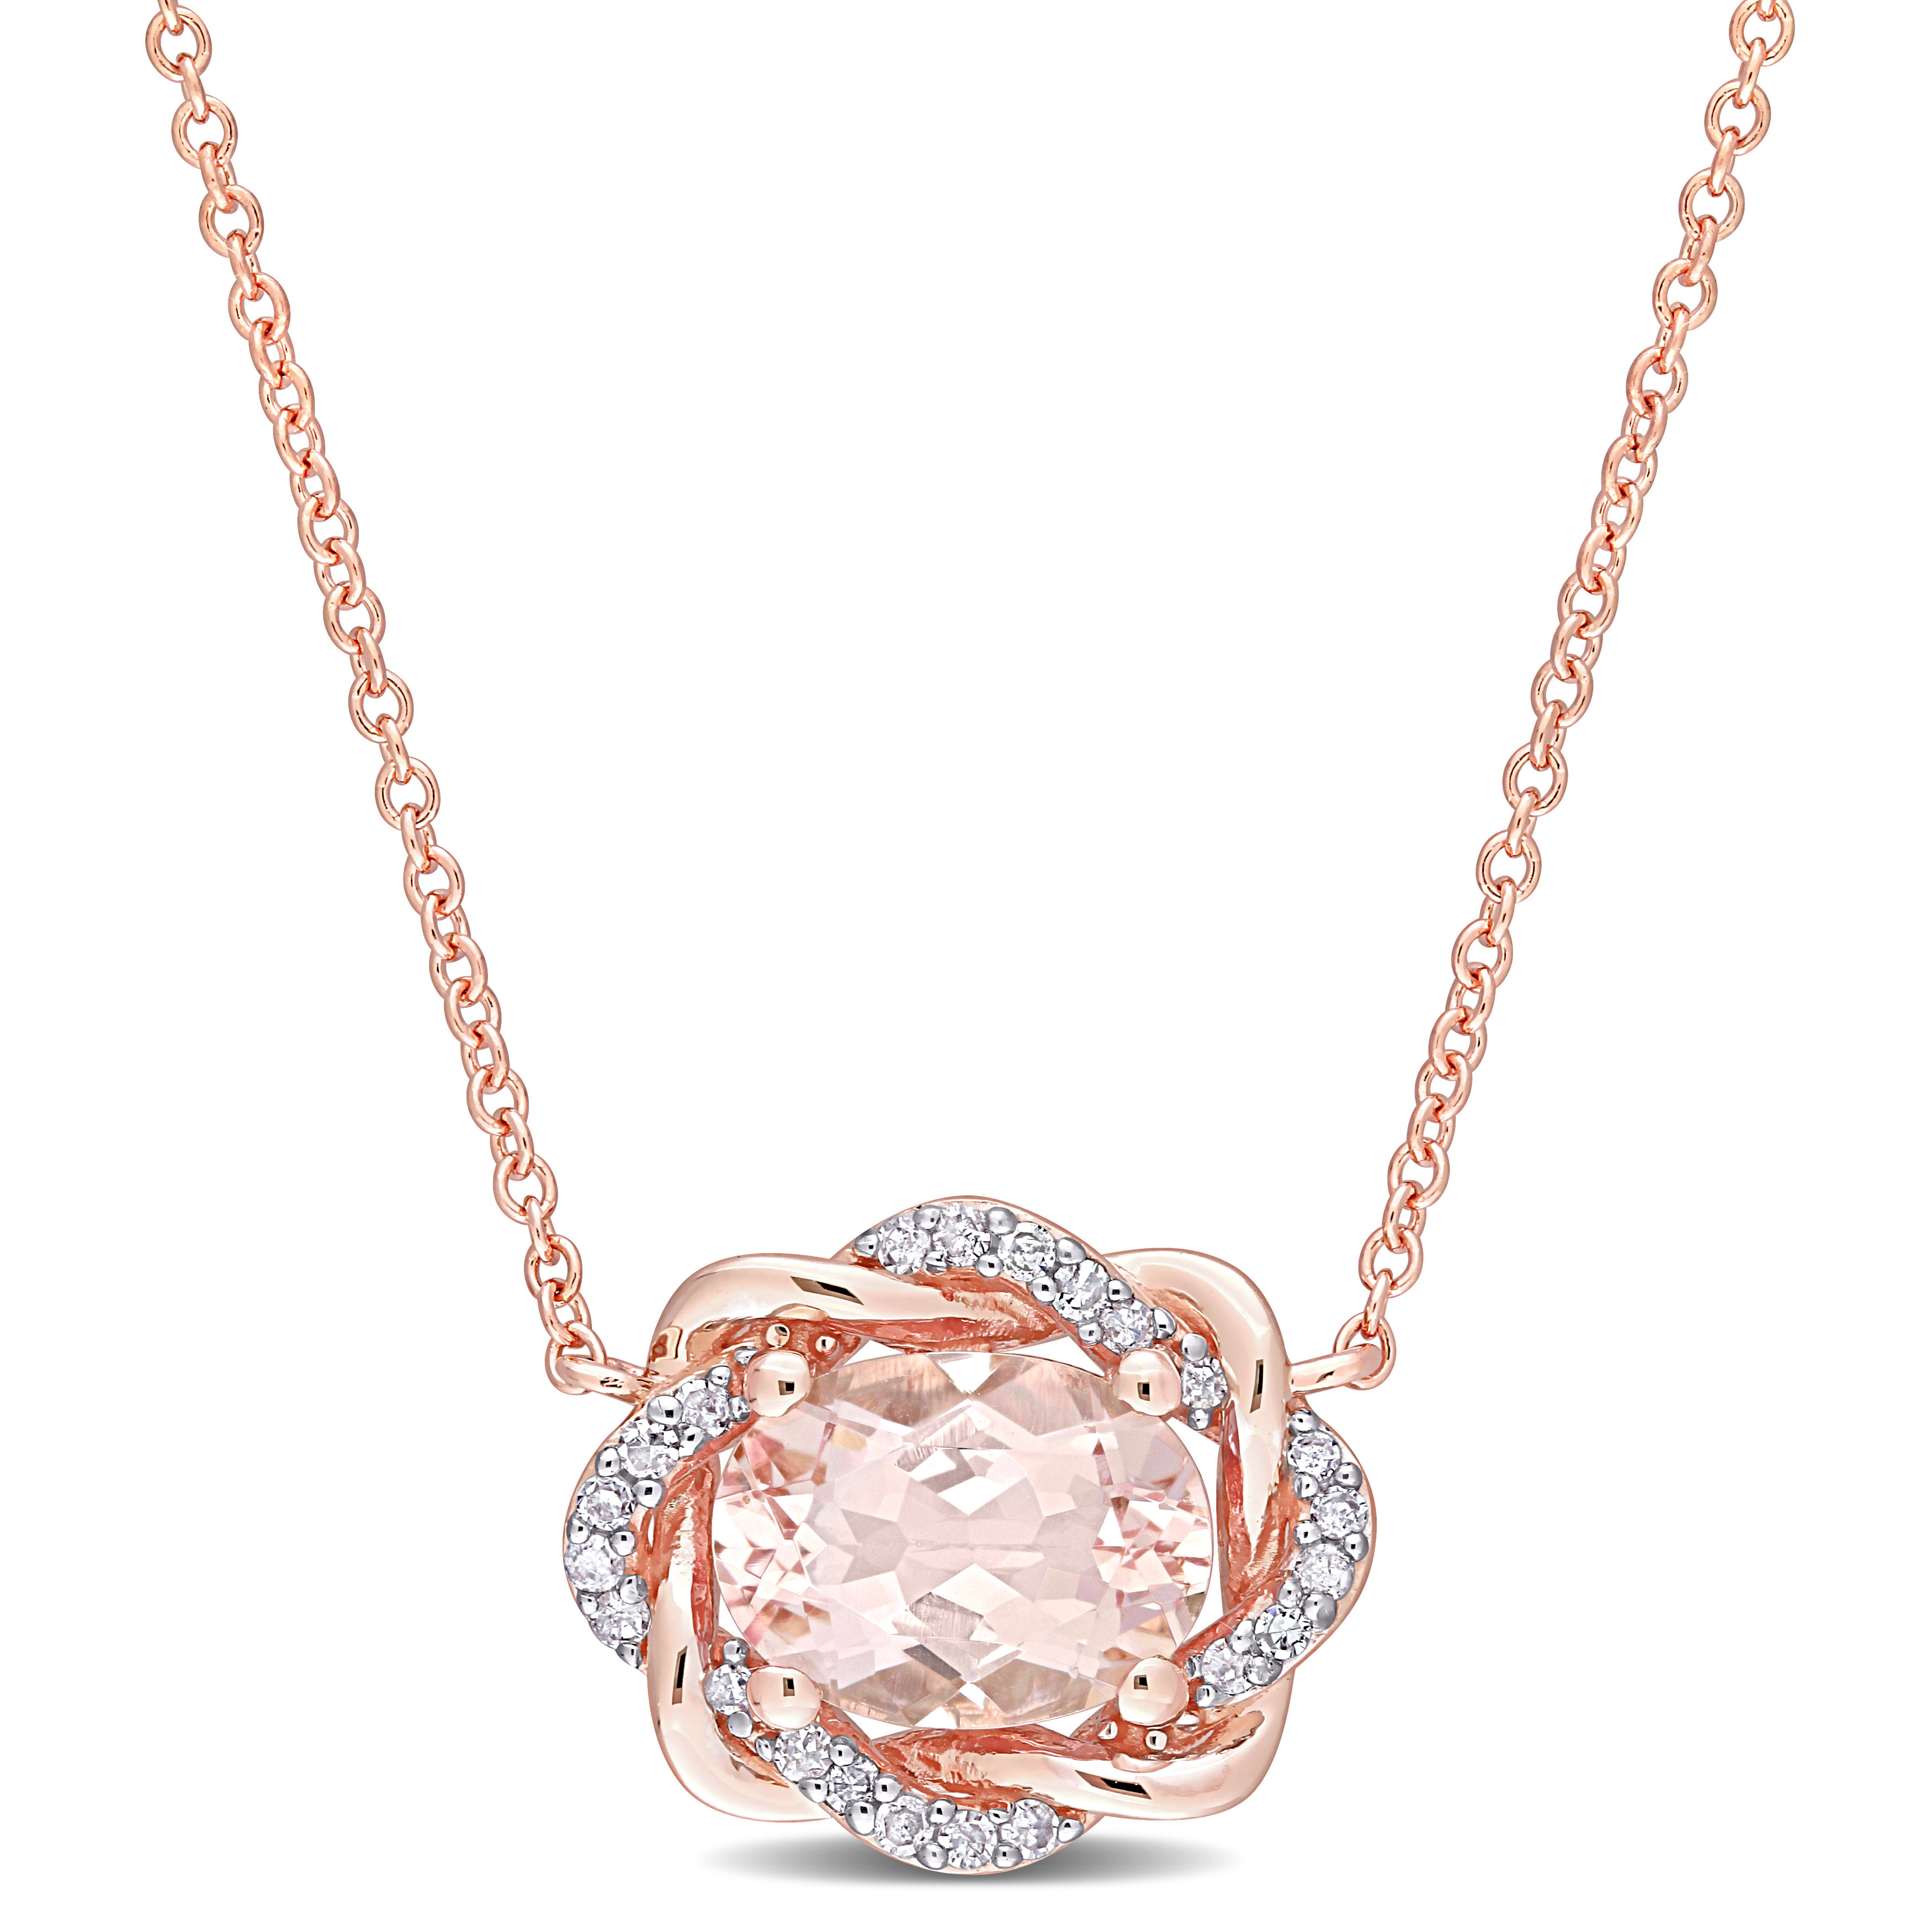 1 1/7 CT TGW Morganite and 1/10 CT Diamond TW Interlaced Halo Necklace in 10k Rose Gold - 17 in.